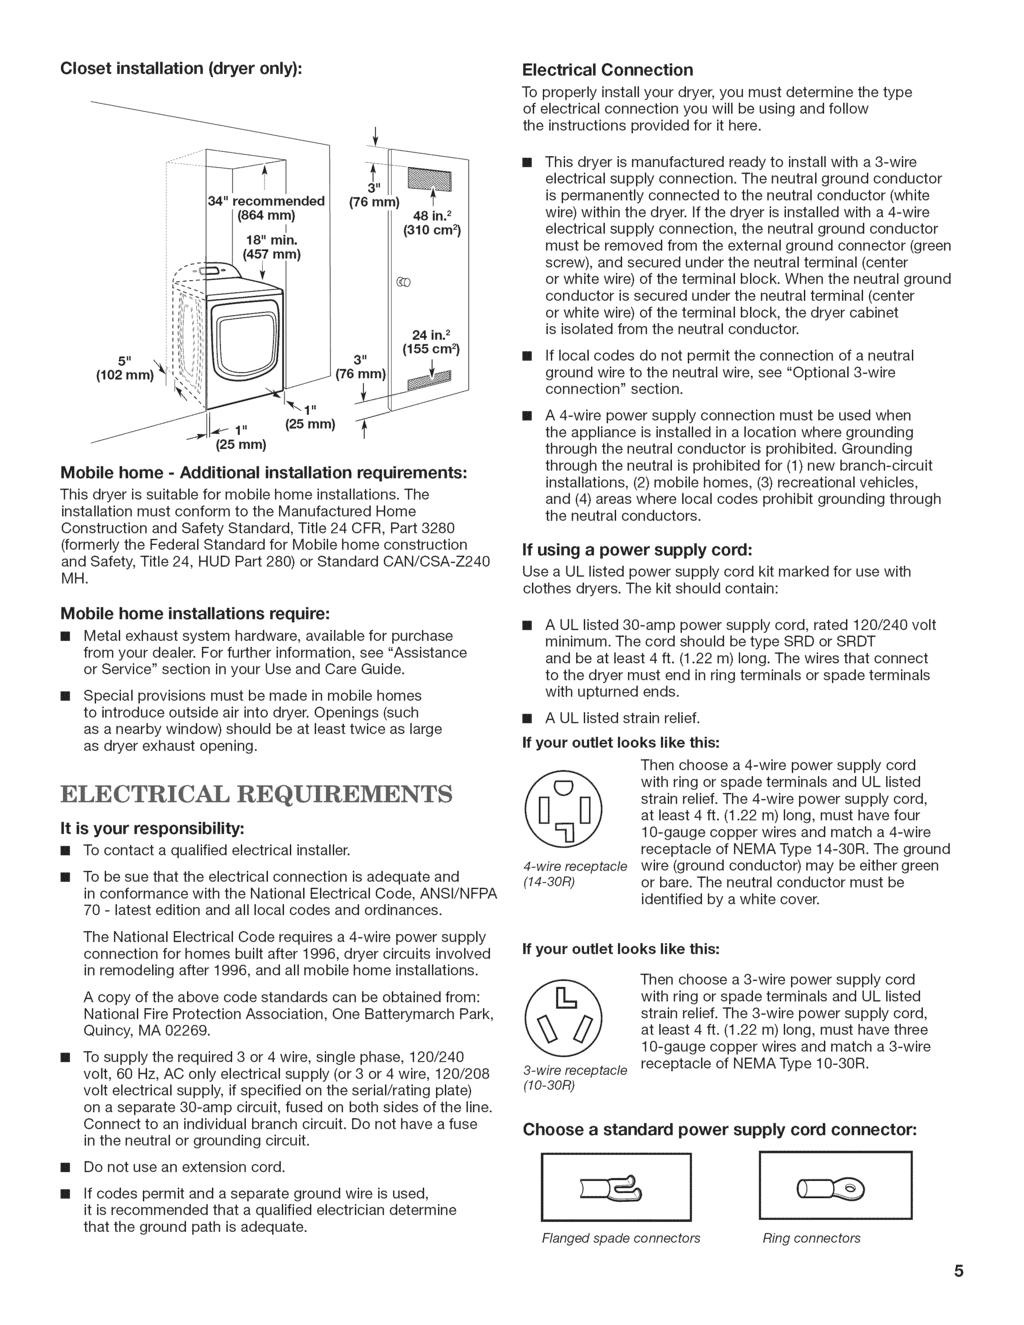 Closetinstallation {dryer only): Electrical Connection To properly install your dryer, you must determine the type of electrical connection you will be using and follow the instructions provided for